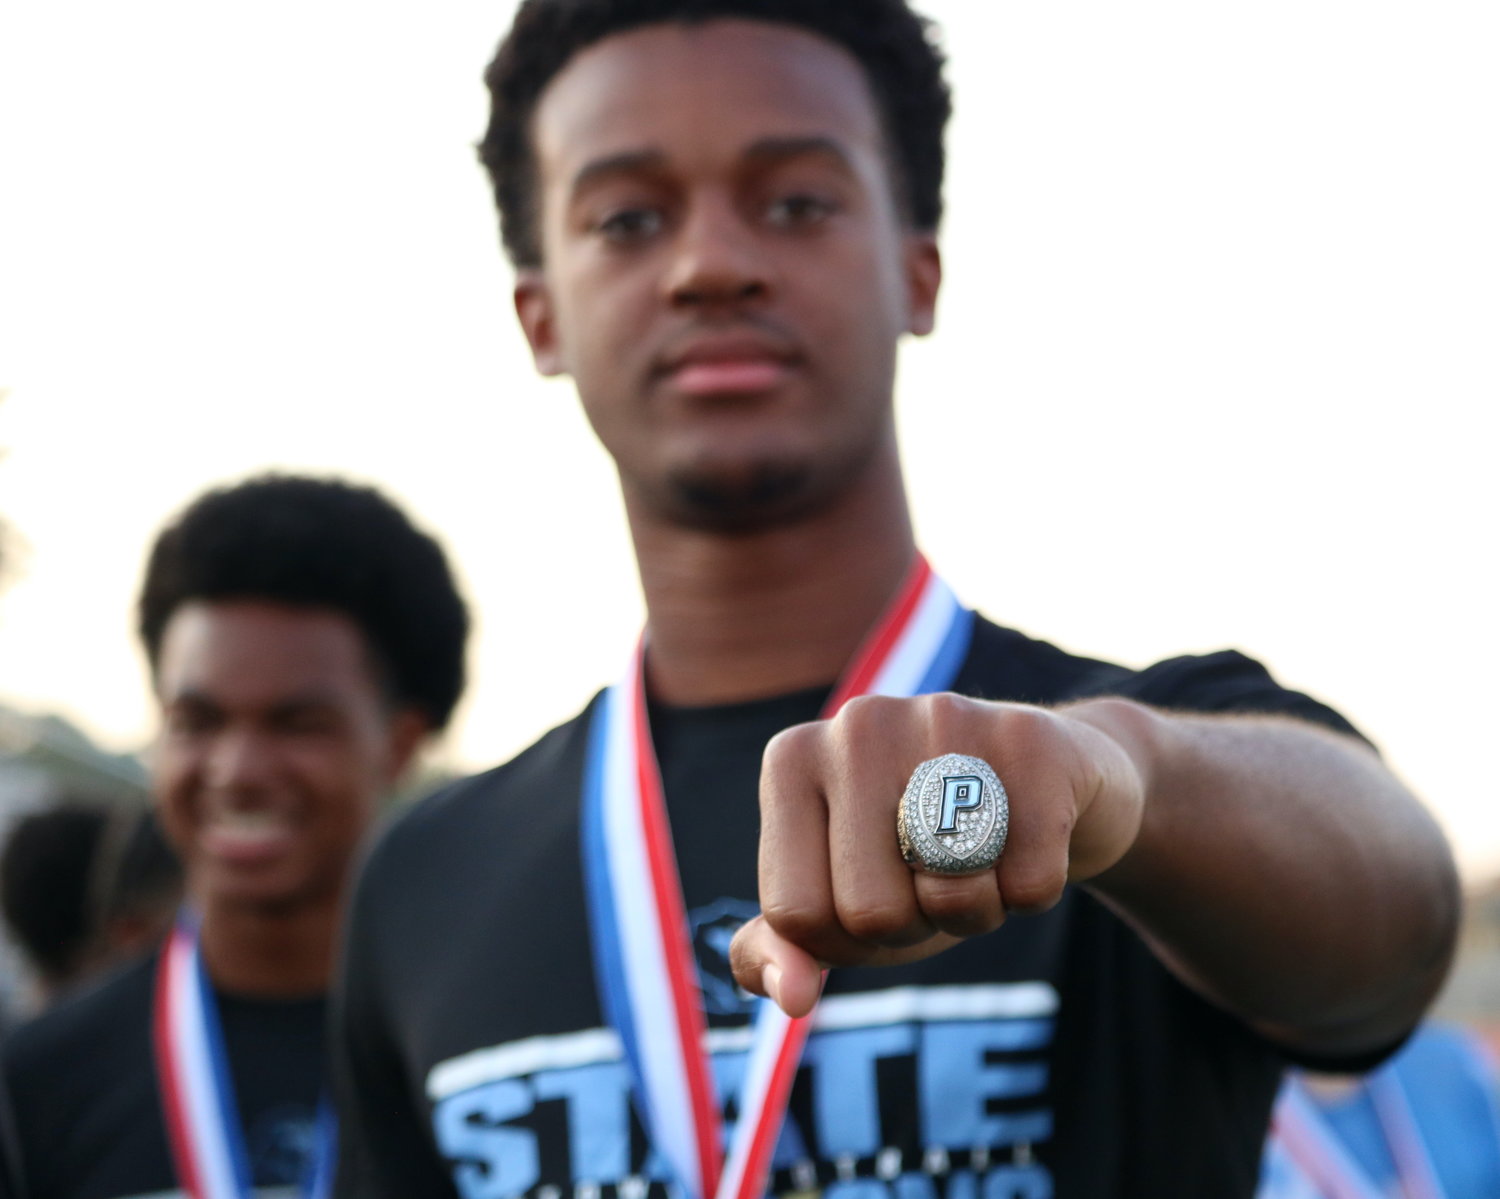 CJ Dumas shows off his state championship ring during Thursday’s ring ceremony at Paetow.